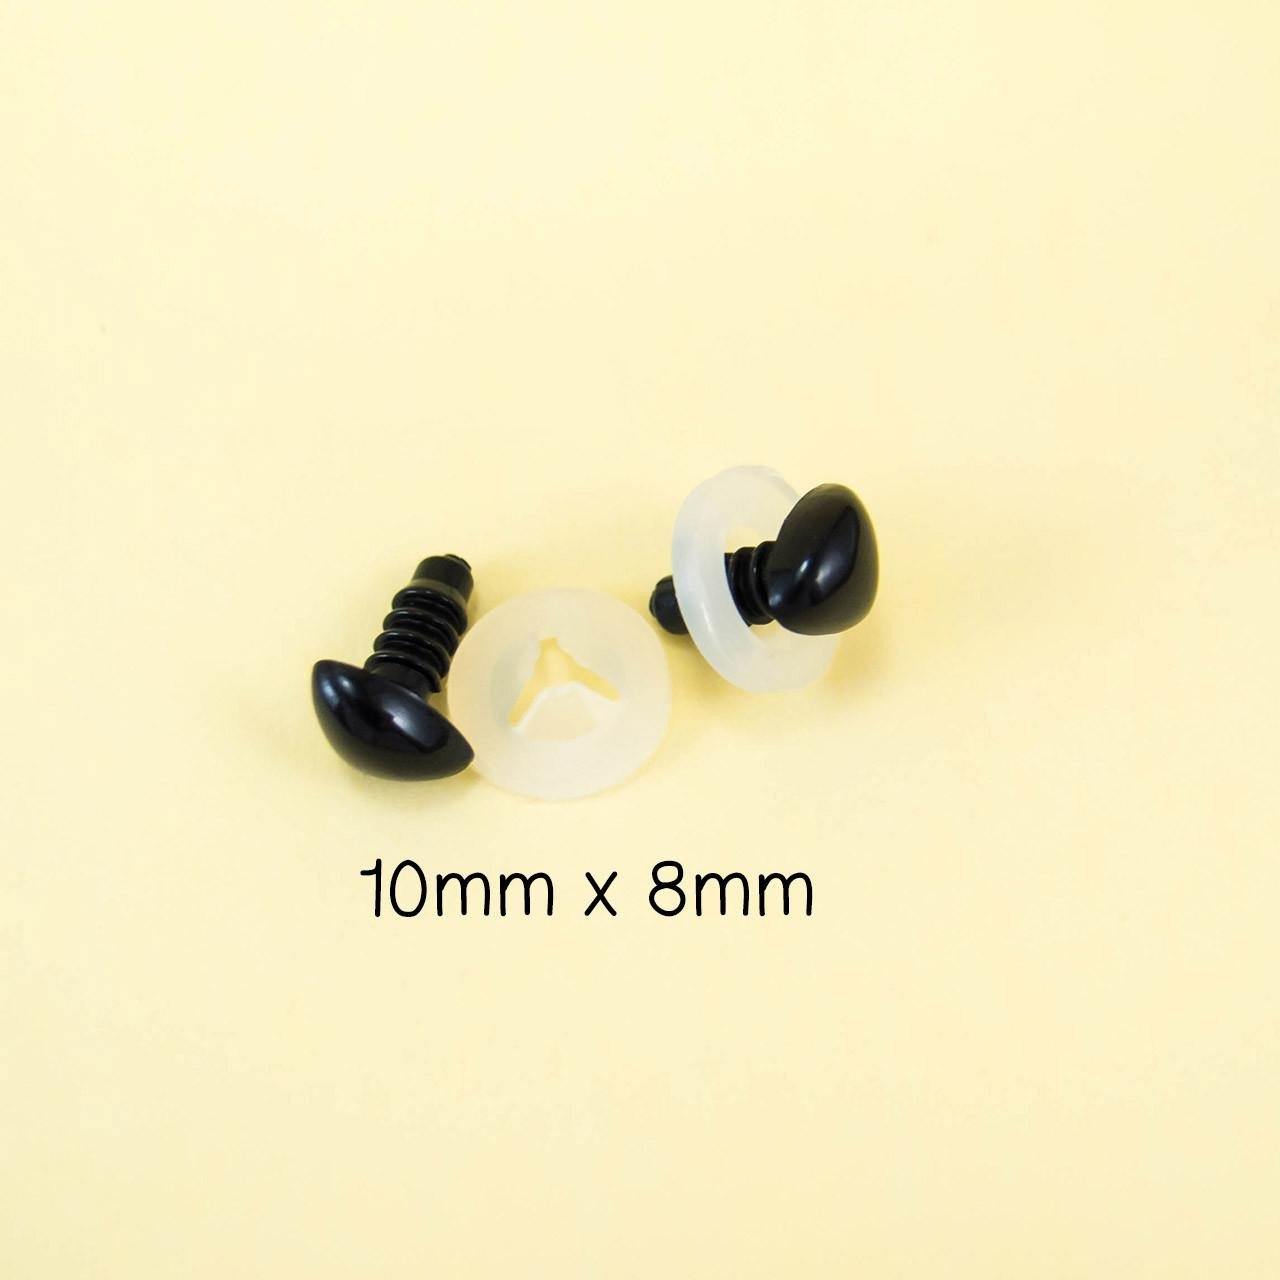 10mm triangle black safety noses